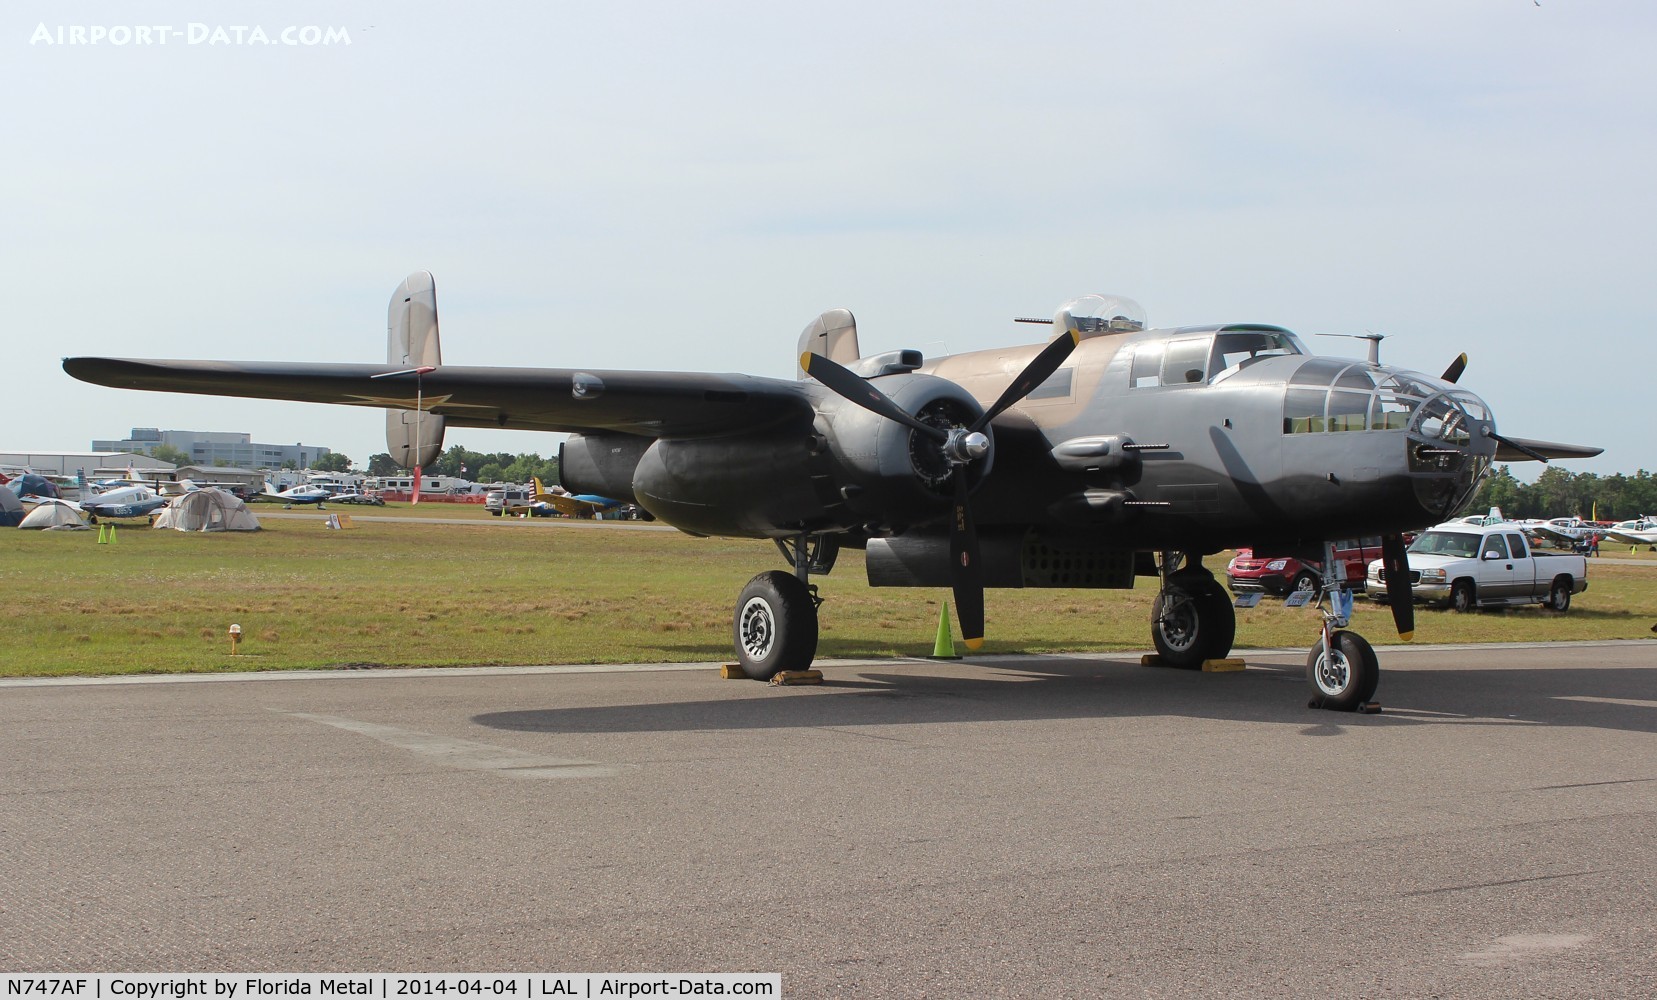 N747AF, 1944 North American B-25J Mitchell Mitchell C/N 108-33731, B-25J Mitchell in Russian lend lease colors